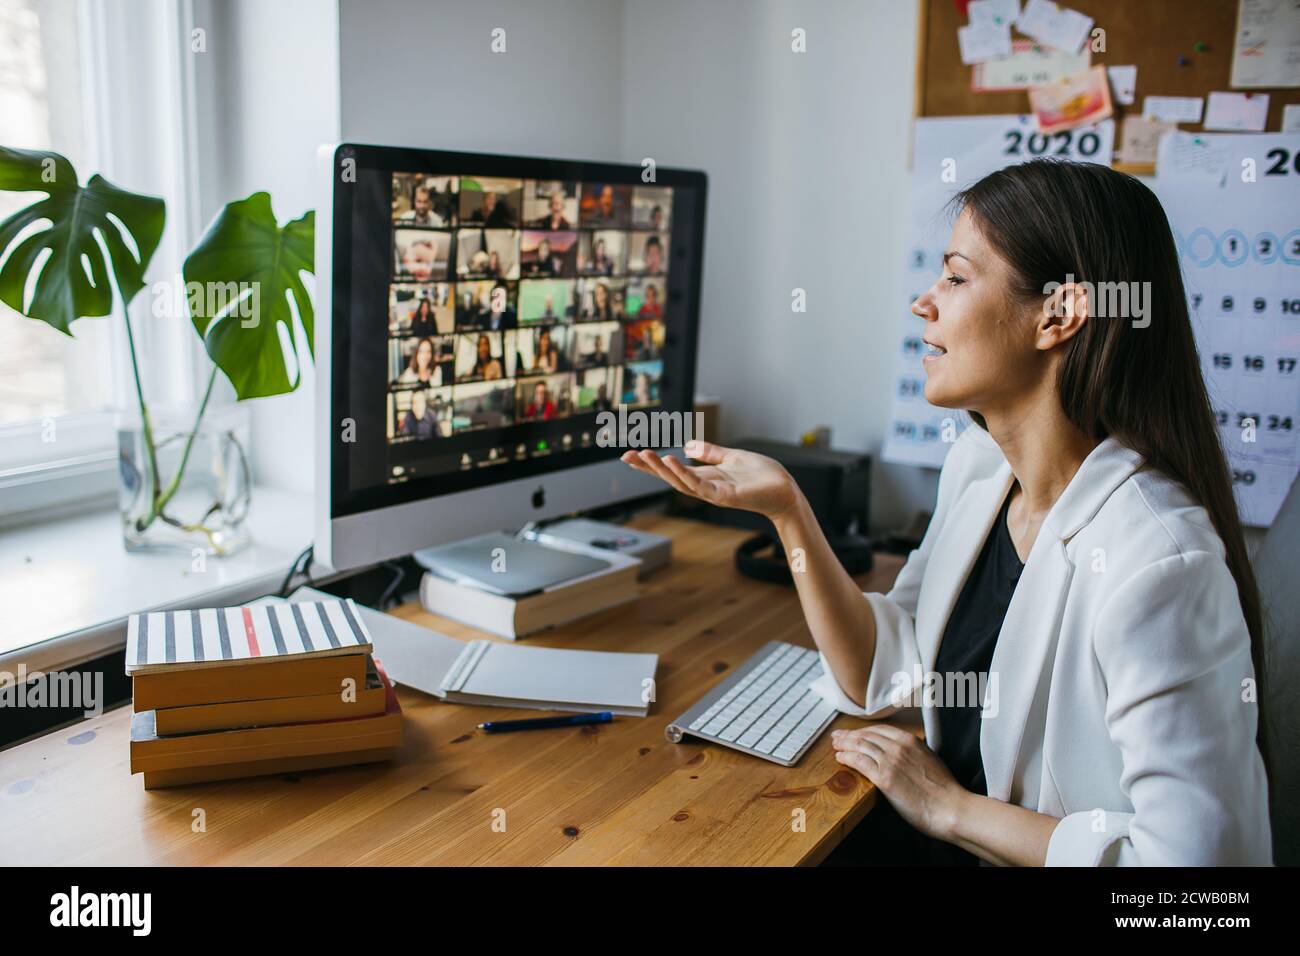 Business woman having Zoom video conference call via computer. Home office.  Stay at home and work from home concept during Coronavirus pandemic meet  Stock Photo - Alamy